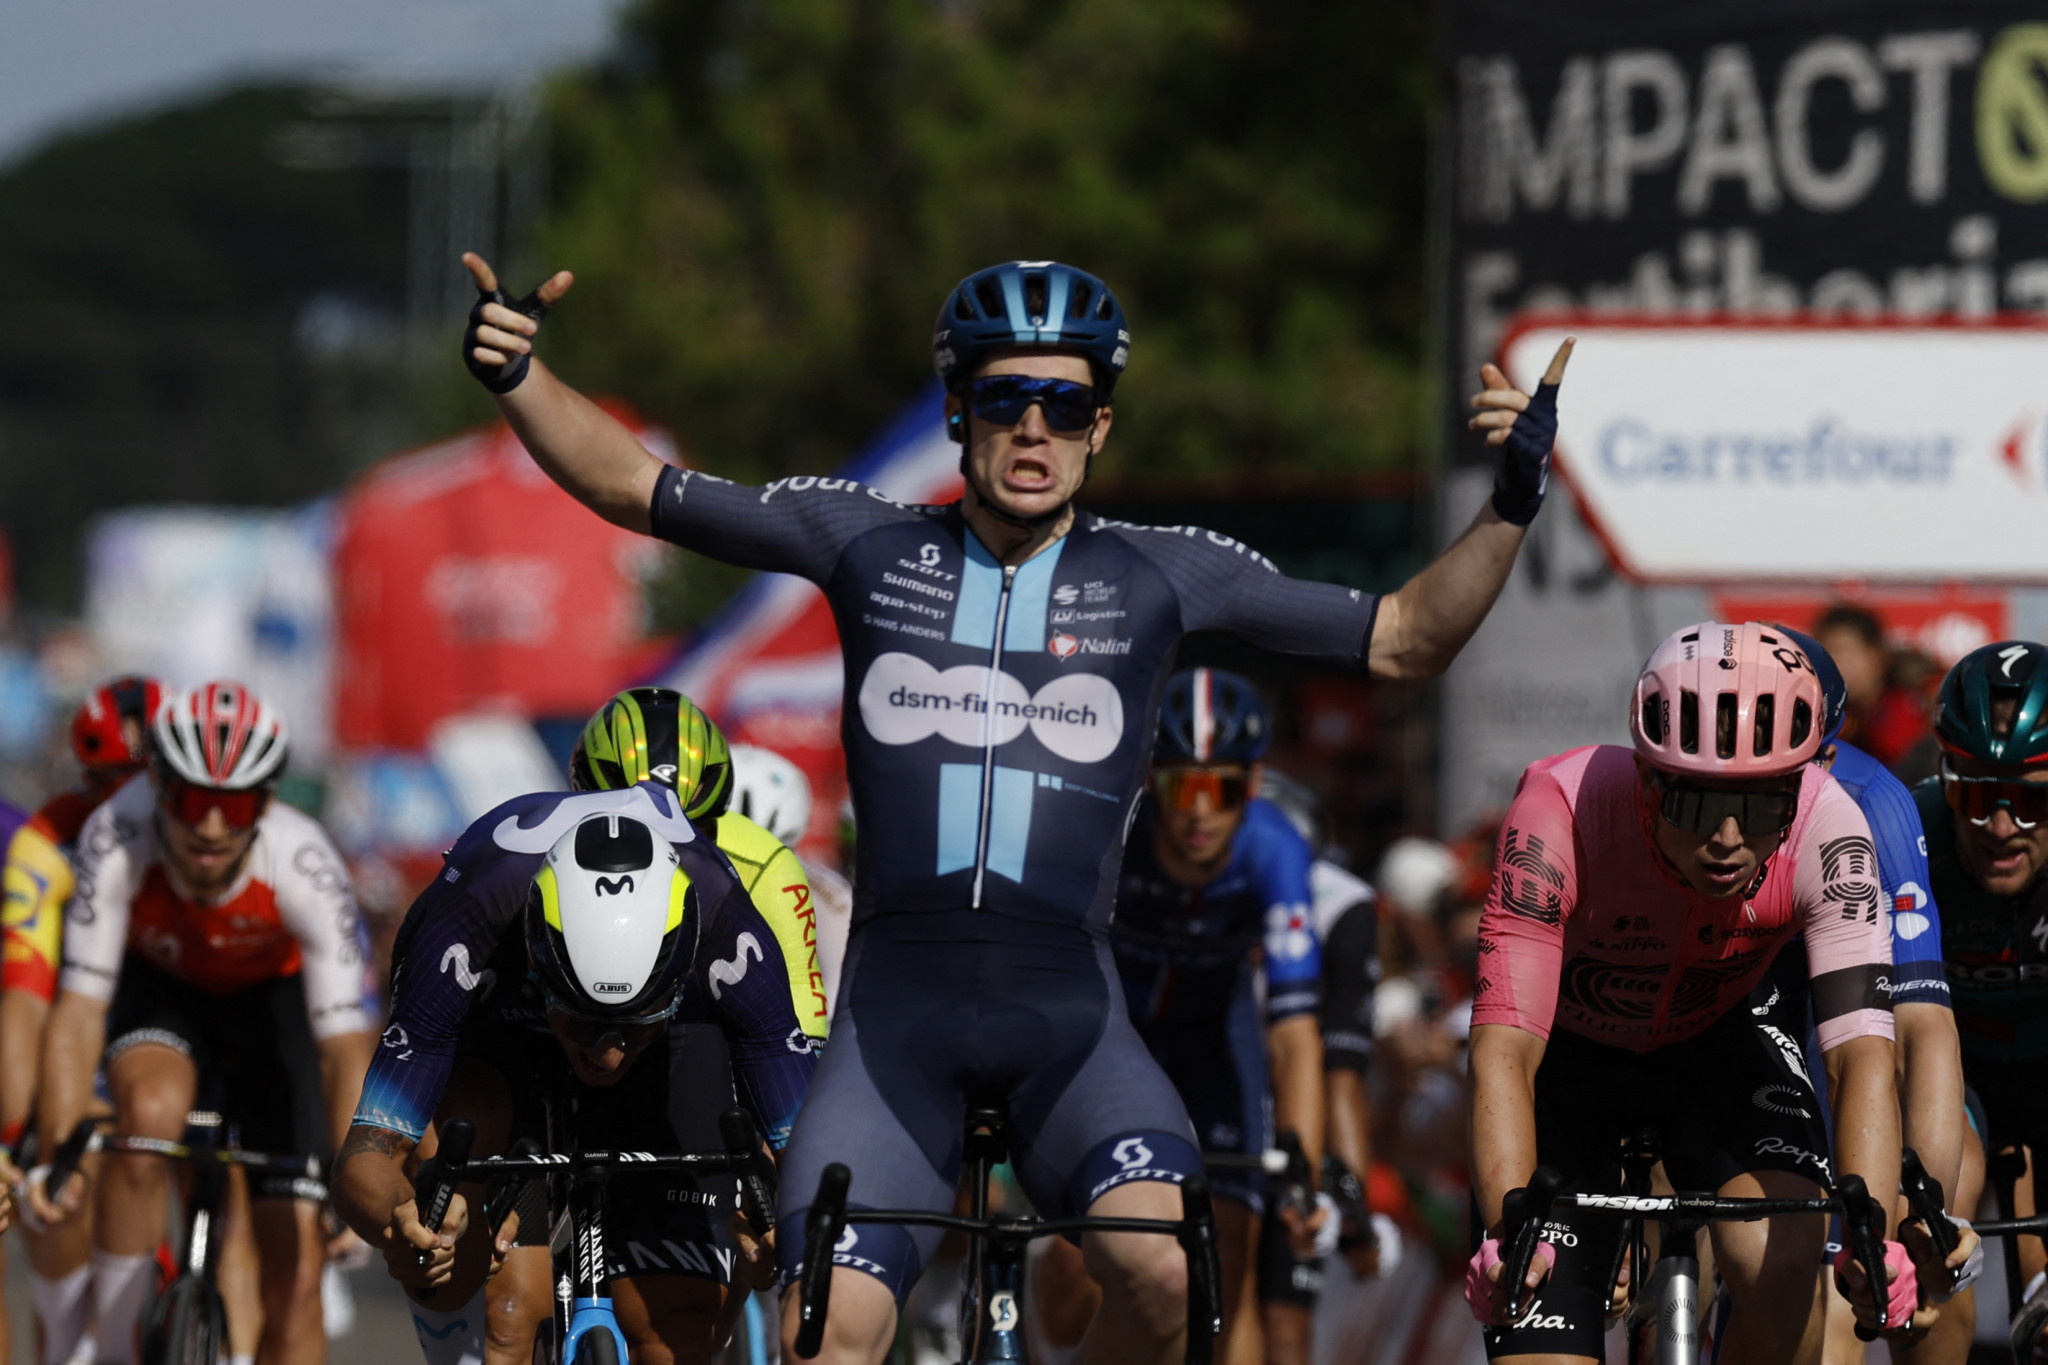 Dainese evades late crash to win Vuelta a España stage 19 while Kuss retains overall lead